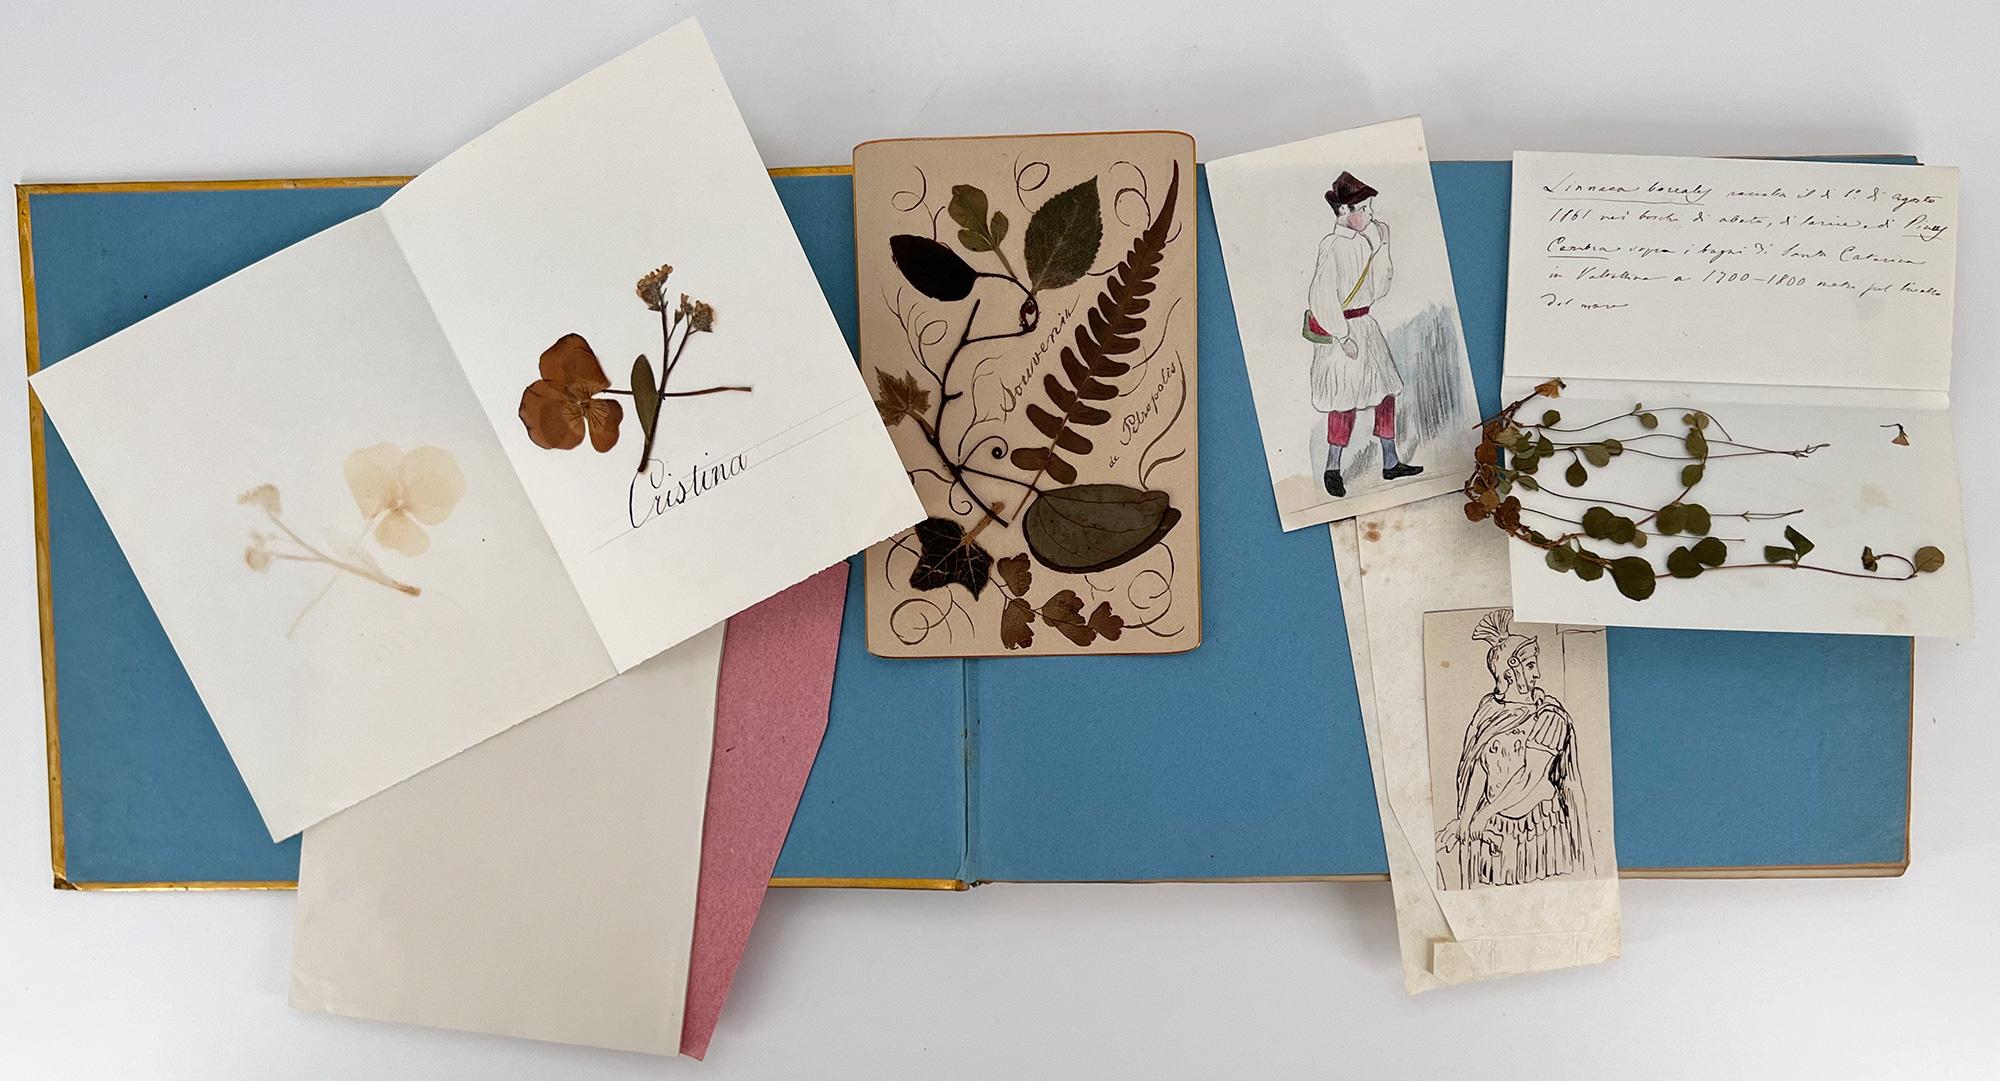 18th Century 19th Century Album Containing Drawings, Memorabilia, and Botanical Samples For Sale